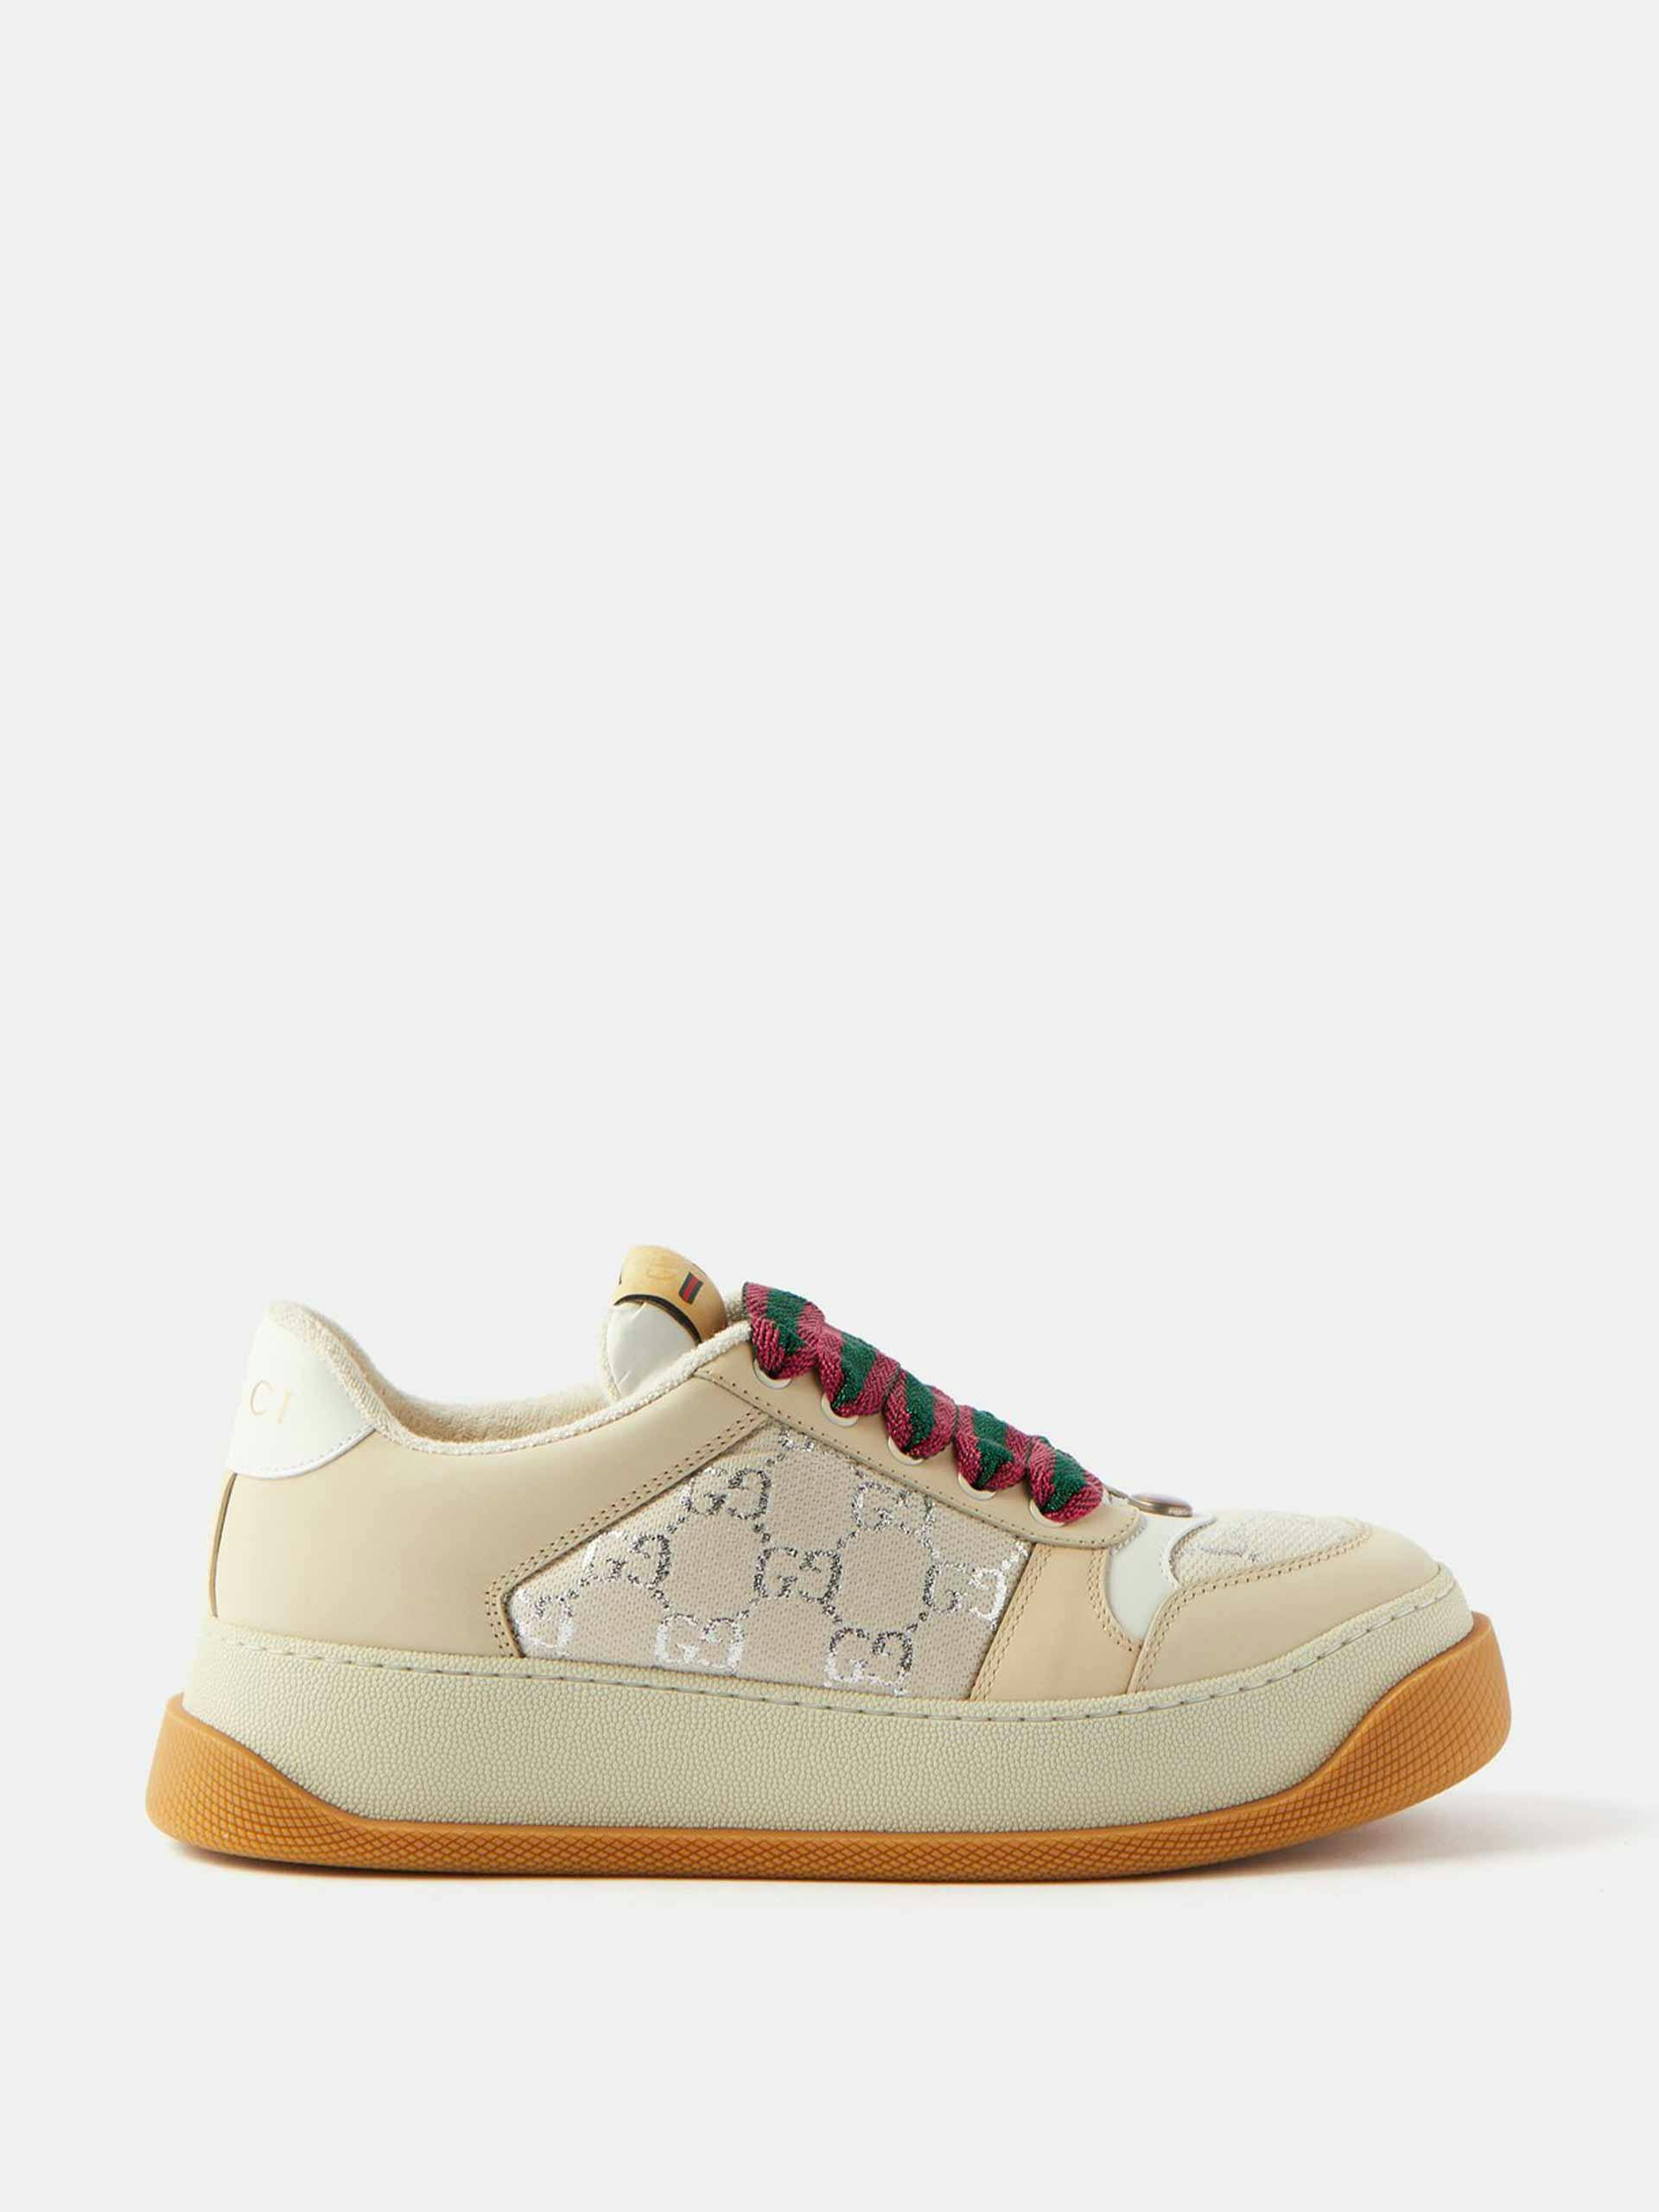 Beige GG leather sneakers